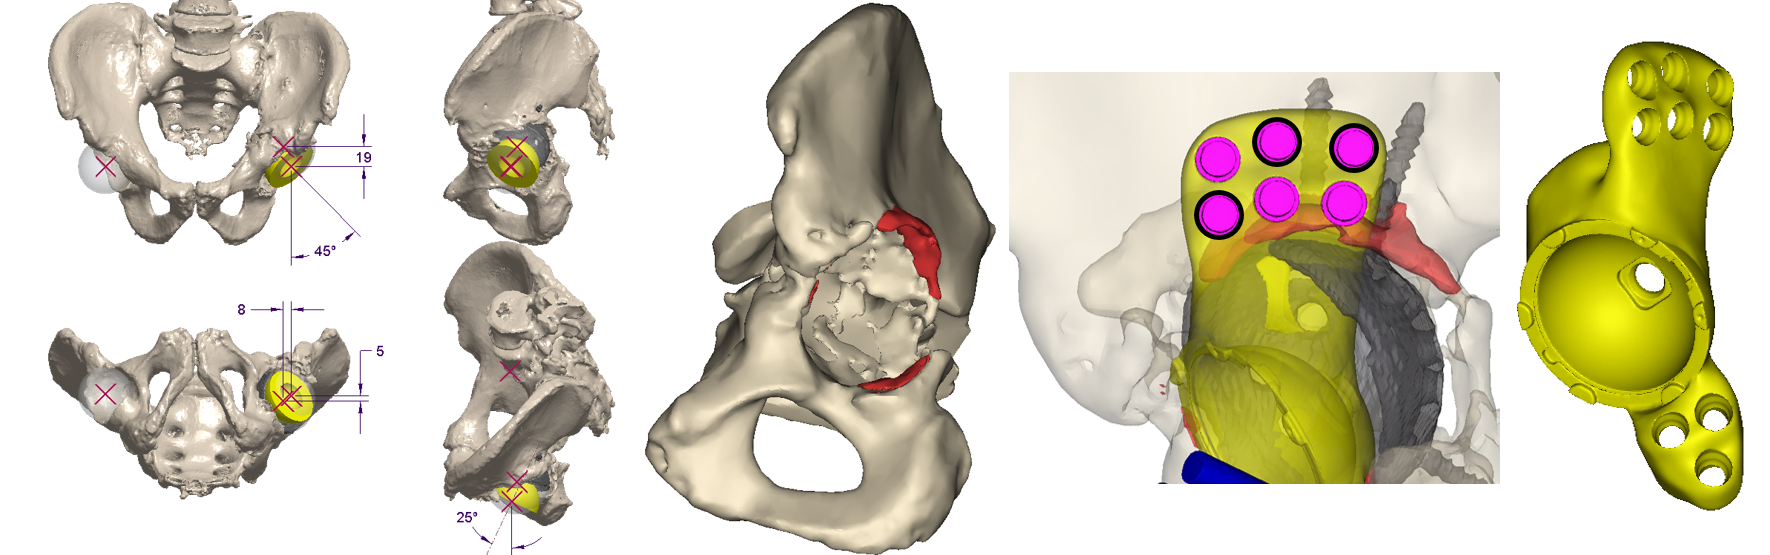 The Device Development team works with the surgeon and outside manufacturers to develop a patient-specific flanged acetabular component to treat the patient’s unique defect.